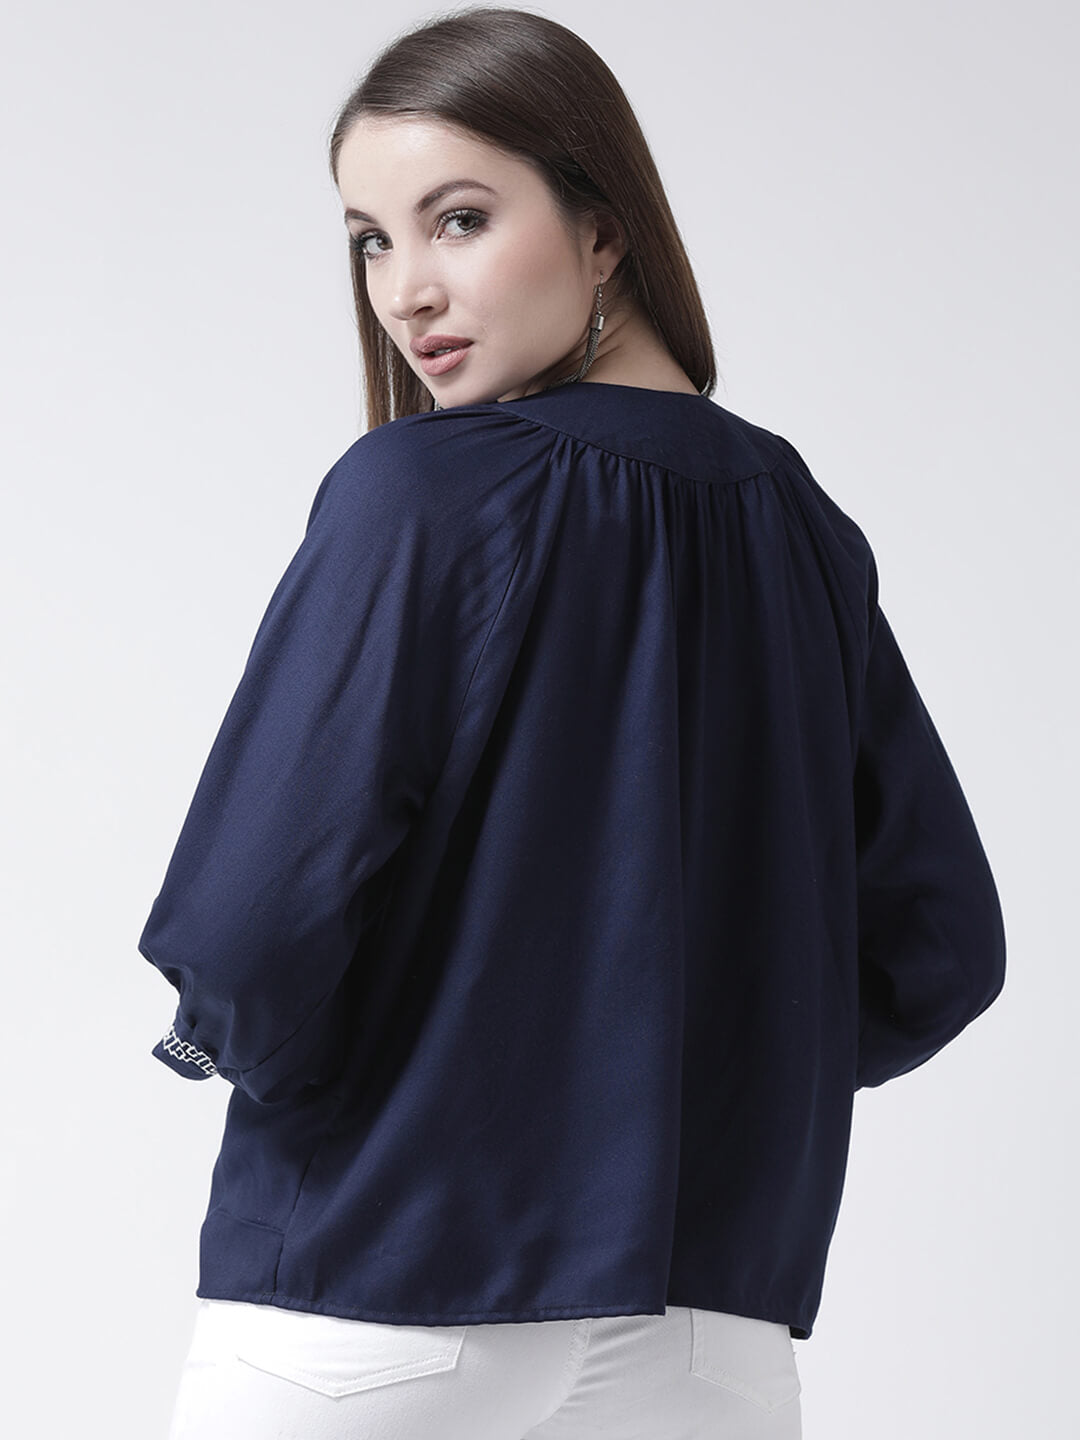 Women'S Navy Top With Embroidery On Sleeve